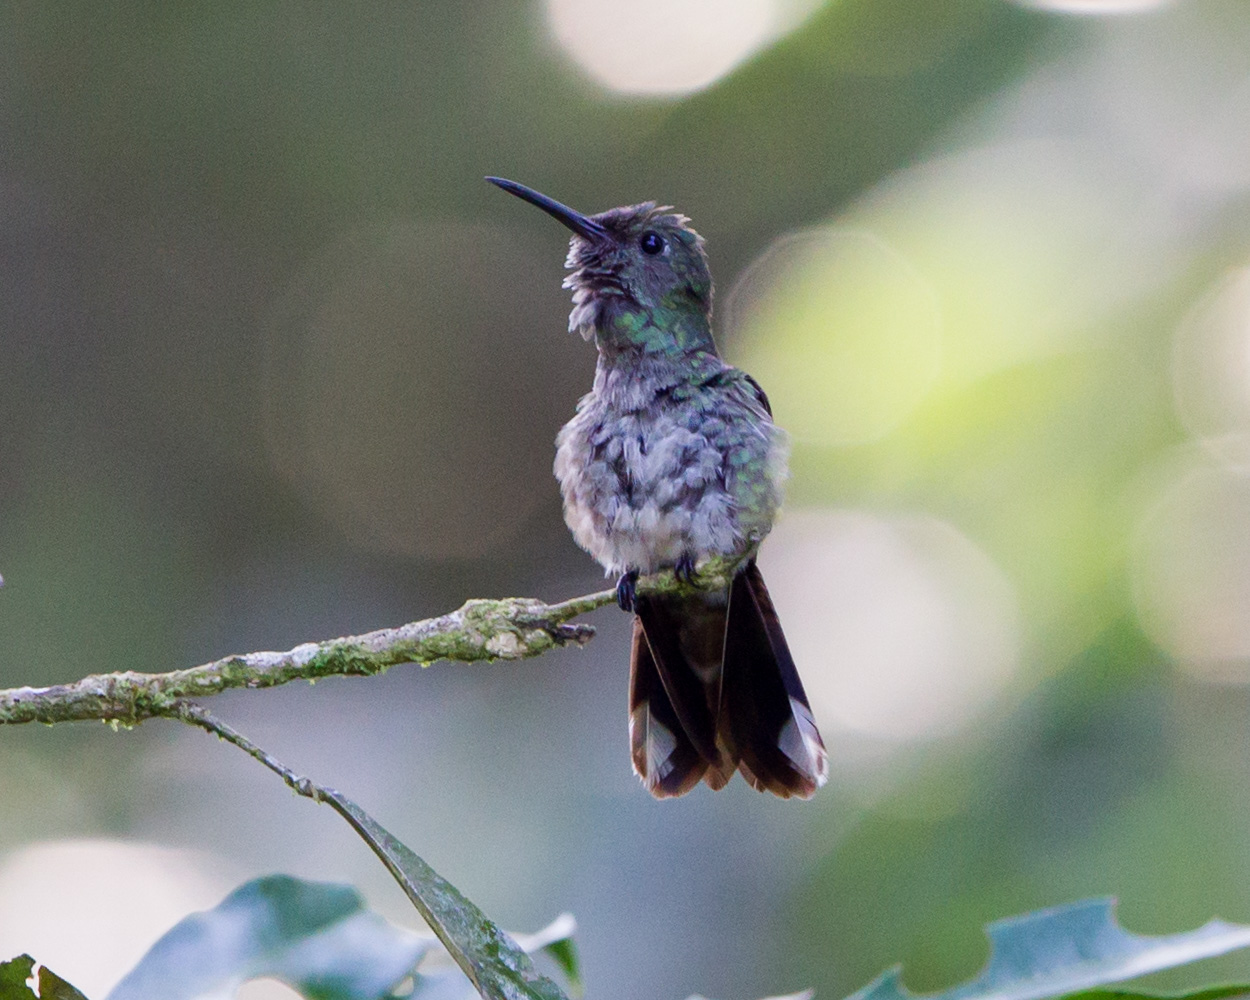 Scaly-Breasted Hummingbird